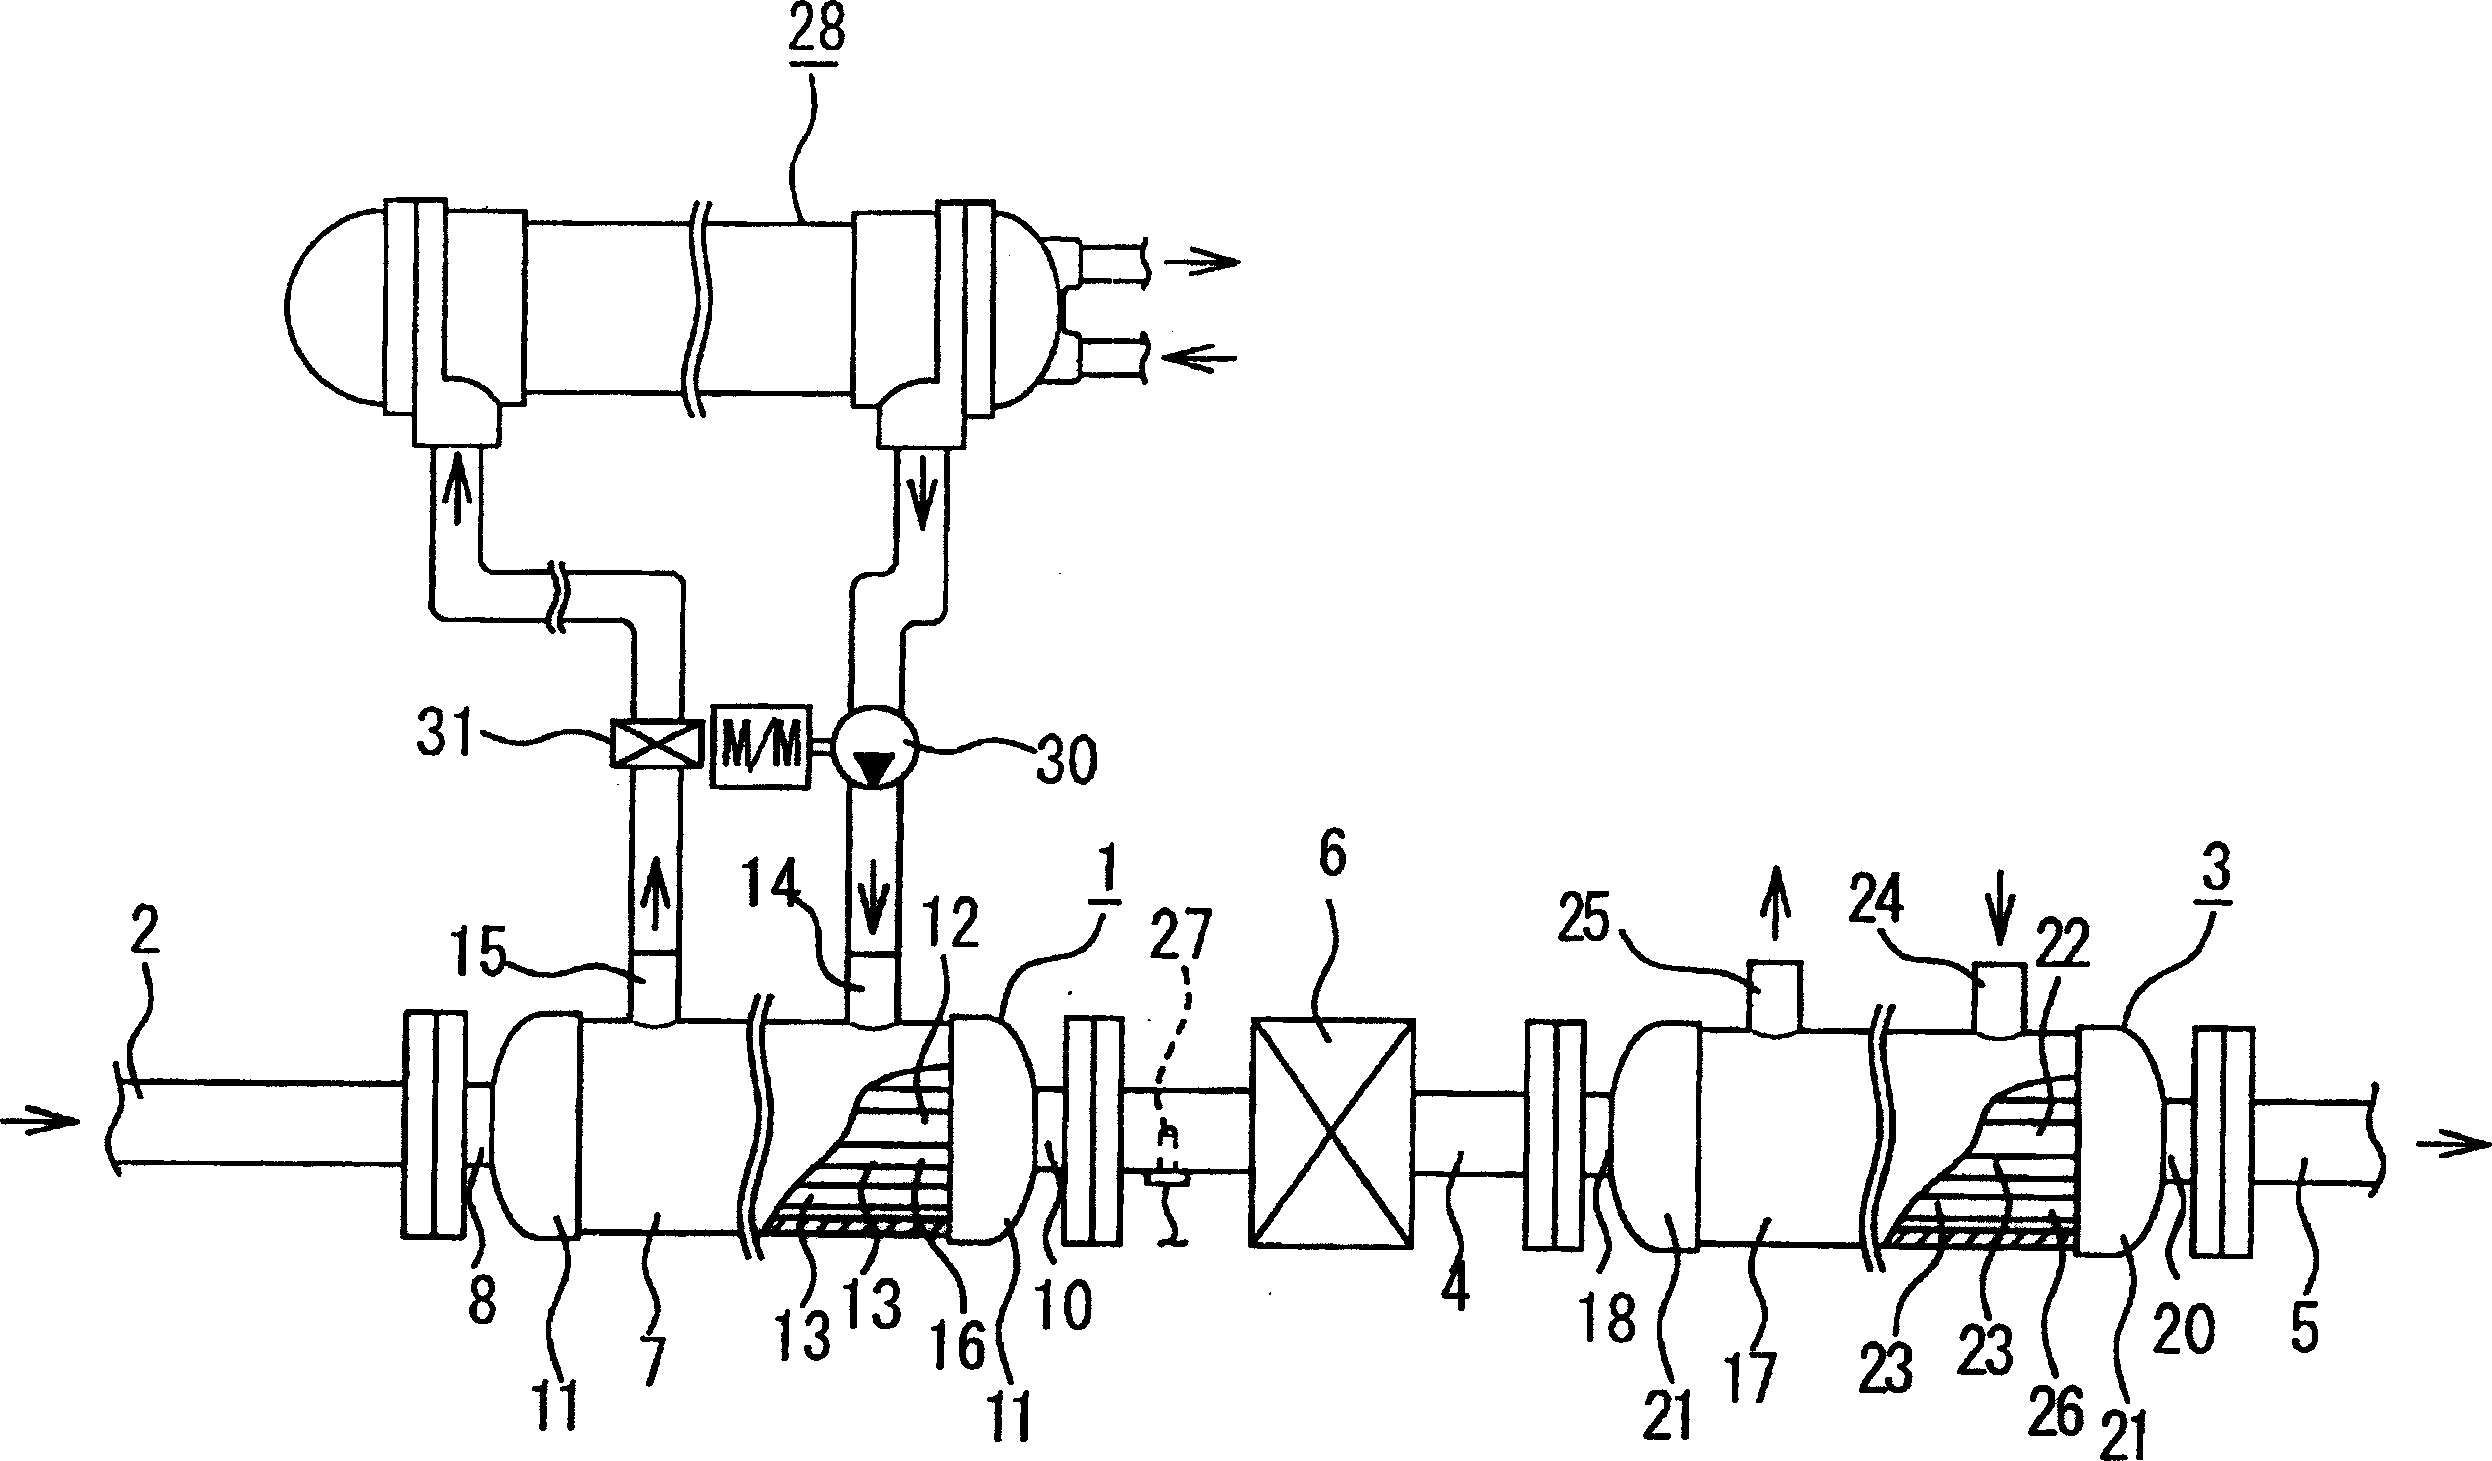 Apparatus for cooling EGR gas